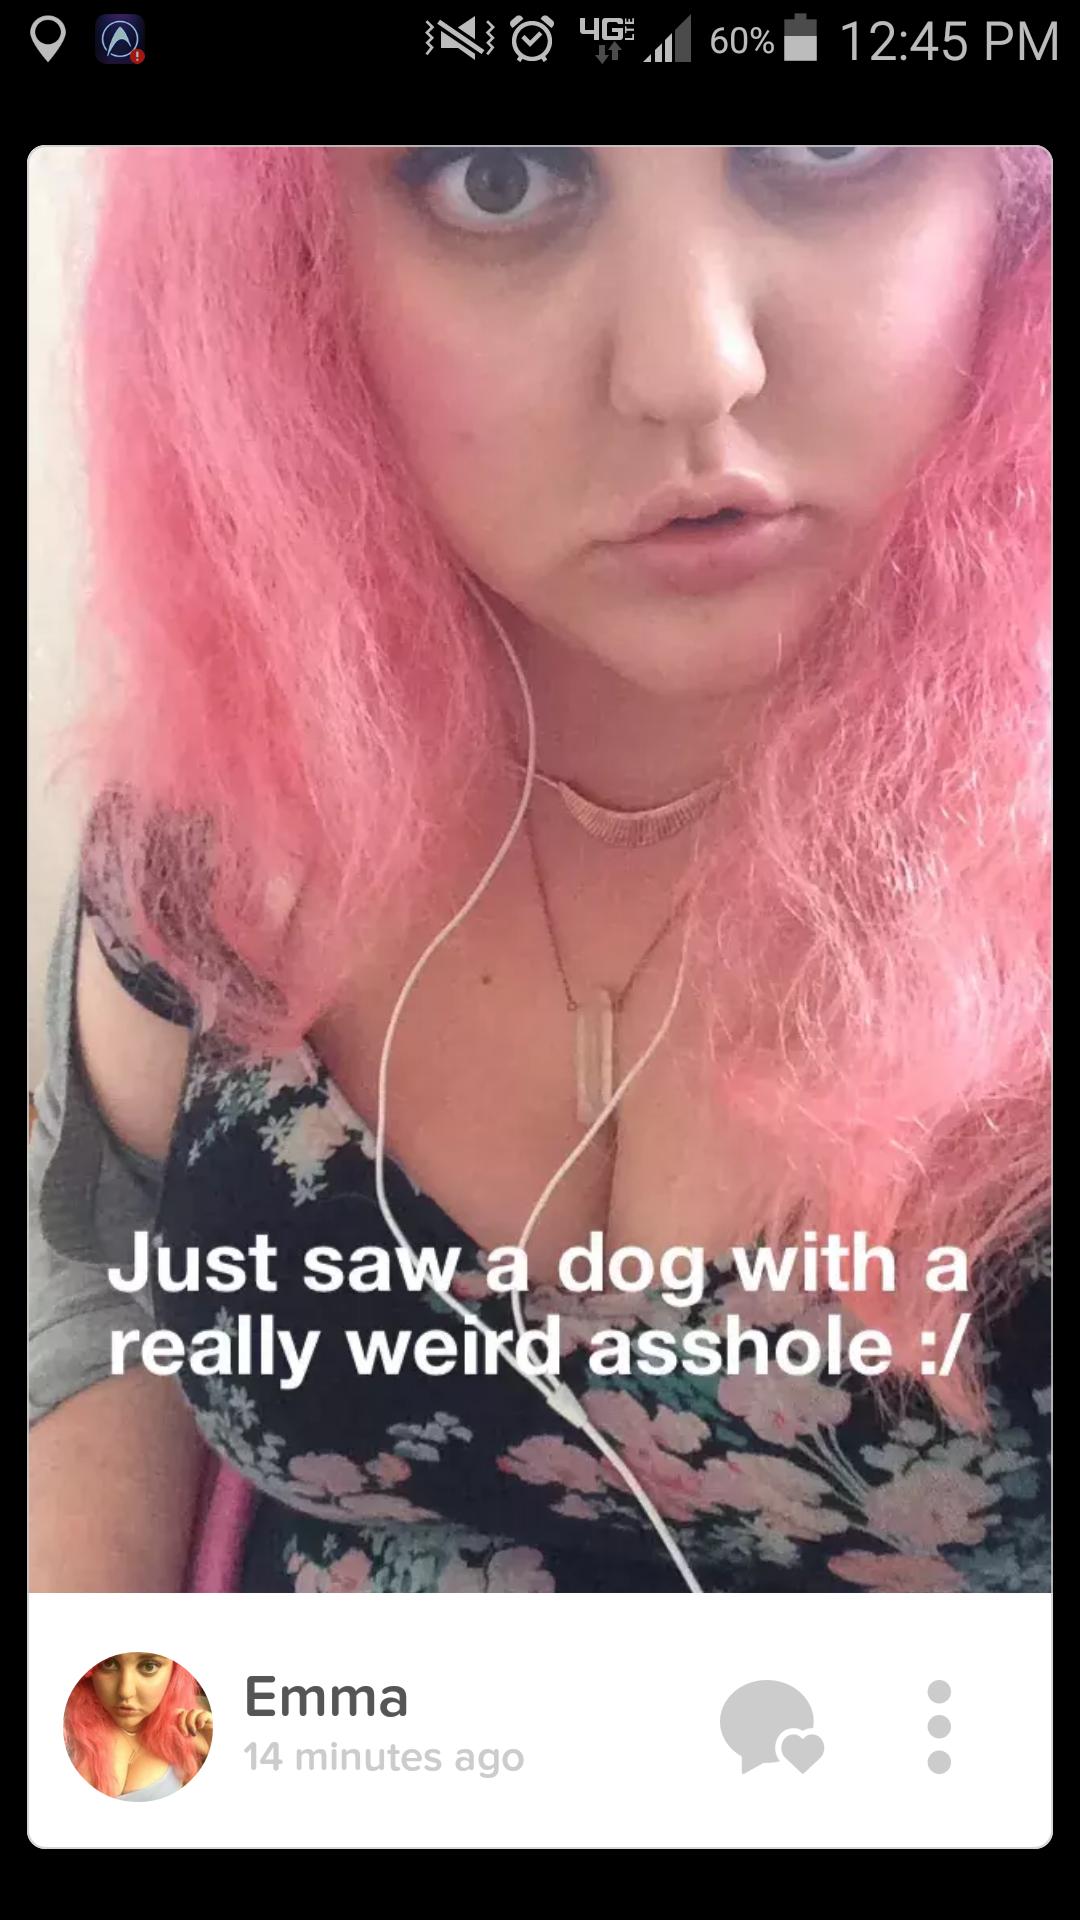 tinder - lip - No 46.60% Just saw a dog with a really weird asshole Emma 14 minutes ago